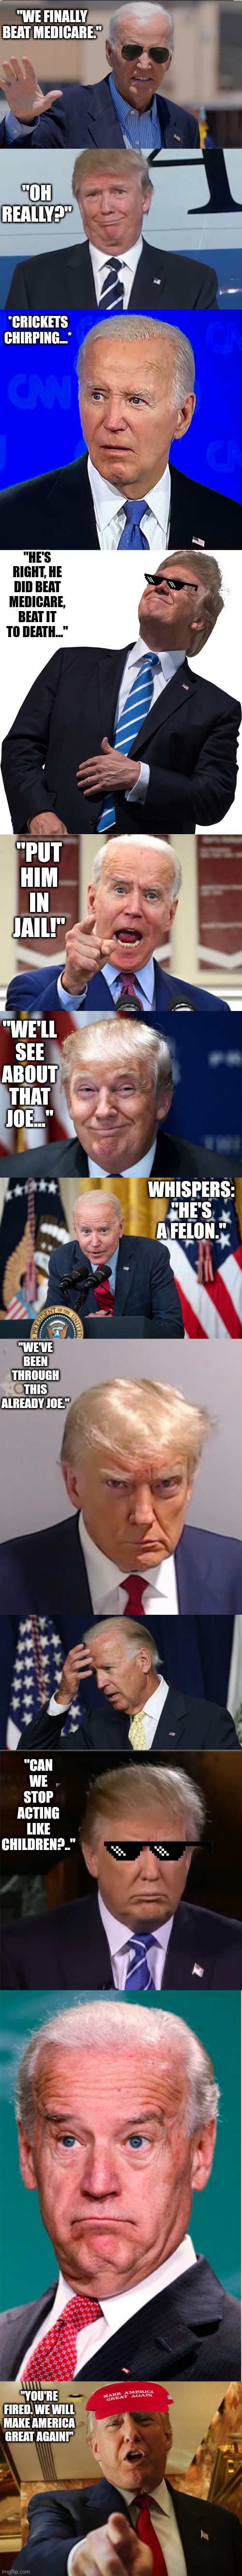 Joe Biden vs Donald Trump | "WE FINALLY BEAT MEDICARE."; "OH REALLY?"; *CRICKETS CHIRPING...*; "HE'S RIGHT, HE DID BEAT MEDICARE, BEAT IT TO DEATH..."; "PUT HIM IN JAIL!"; "WE'LL SEE ABOUT THAT JOE..."; WHISPERS: "HE'S A FELON."; "WE'VE BEEN THROUGH THIS ALREADY JOE."; "CAN WE STOP ACTING LIKE CHILDREN?.."; "YOU'RE FIRED. WE WILL MAKE AMERICA GREAT AGAIN!" | image tagged in joe biden weird face,donald trump,joe biden debate,trump windy,joe biden no malarkey,memes | made w/ Imgflip meme maker